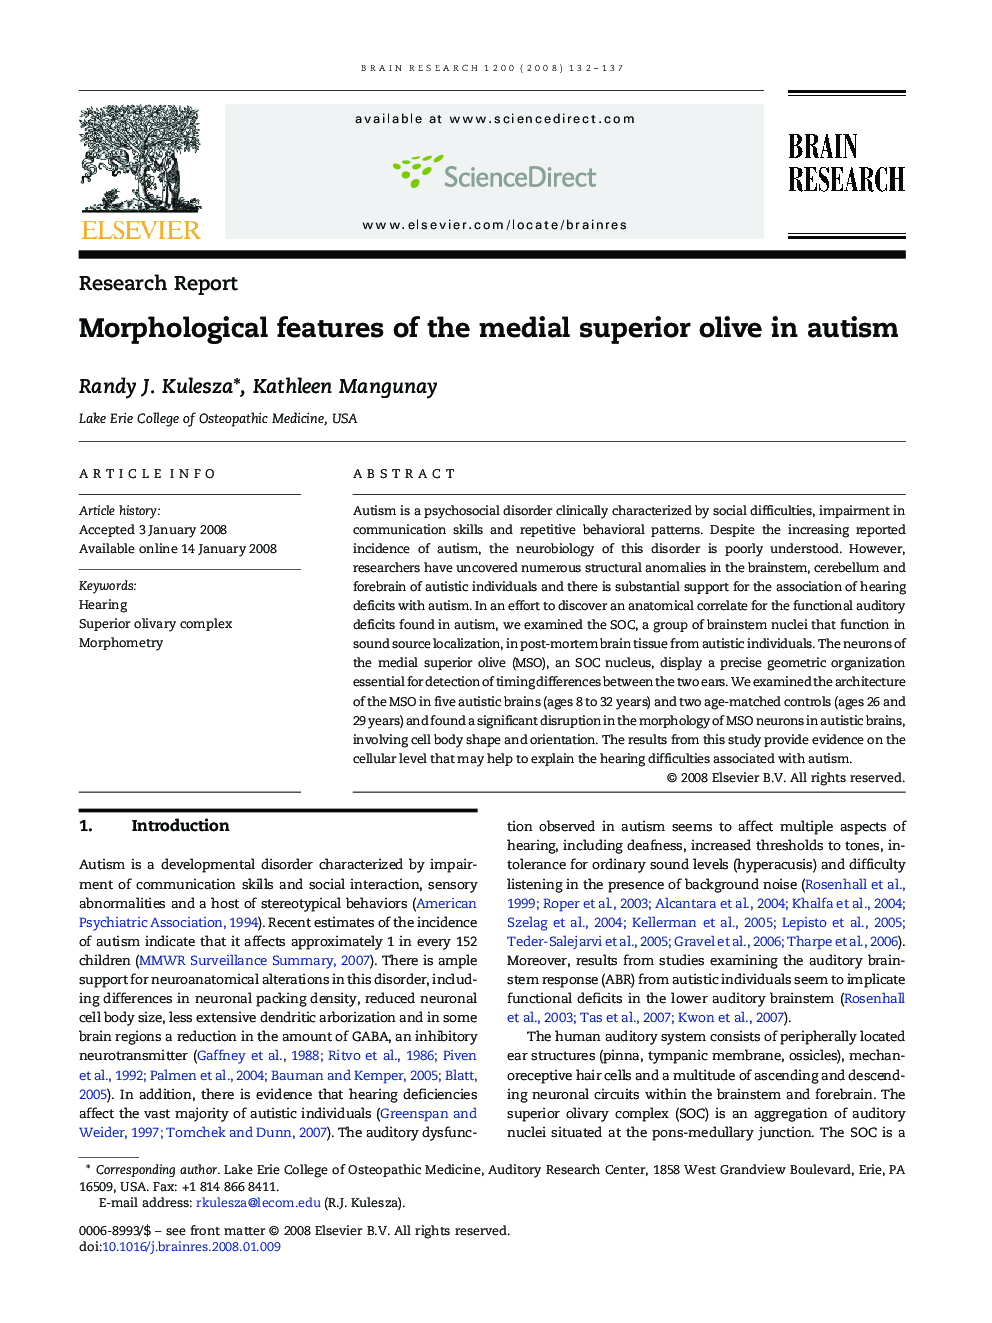 Morphological features of the medial superior olive in autism